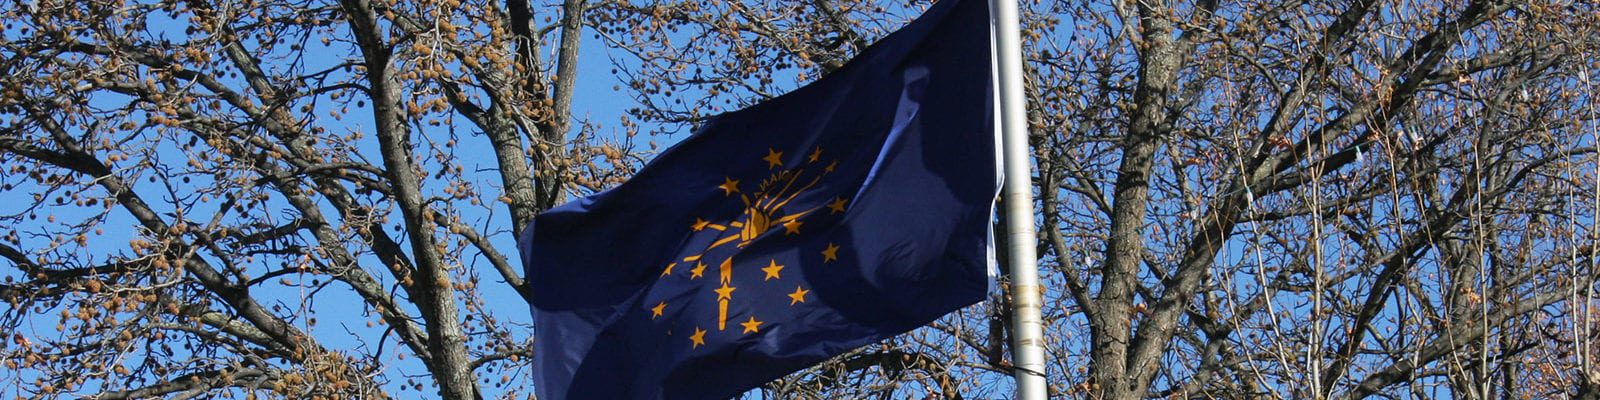 The Indiana state flag flying before a tree on a clear, winter day.